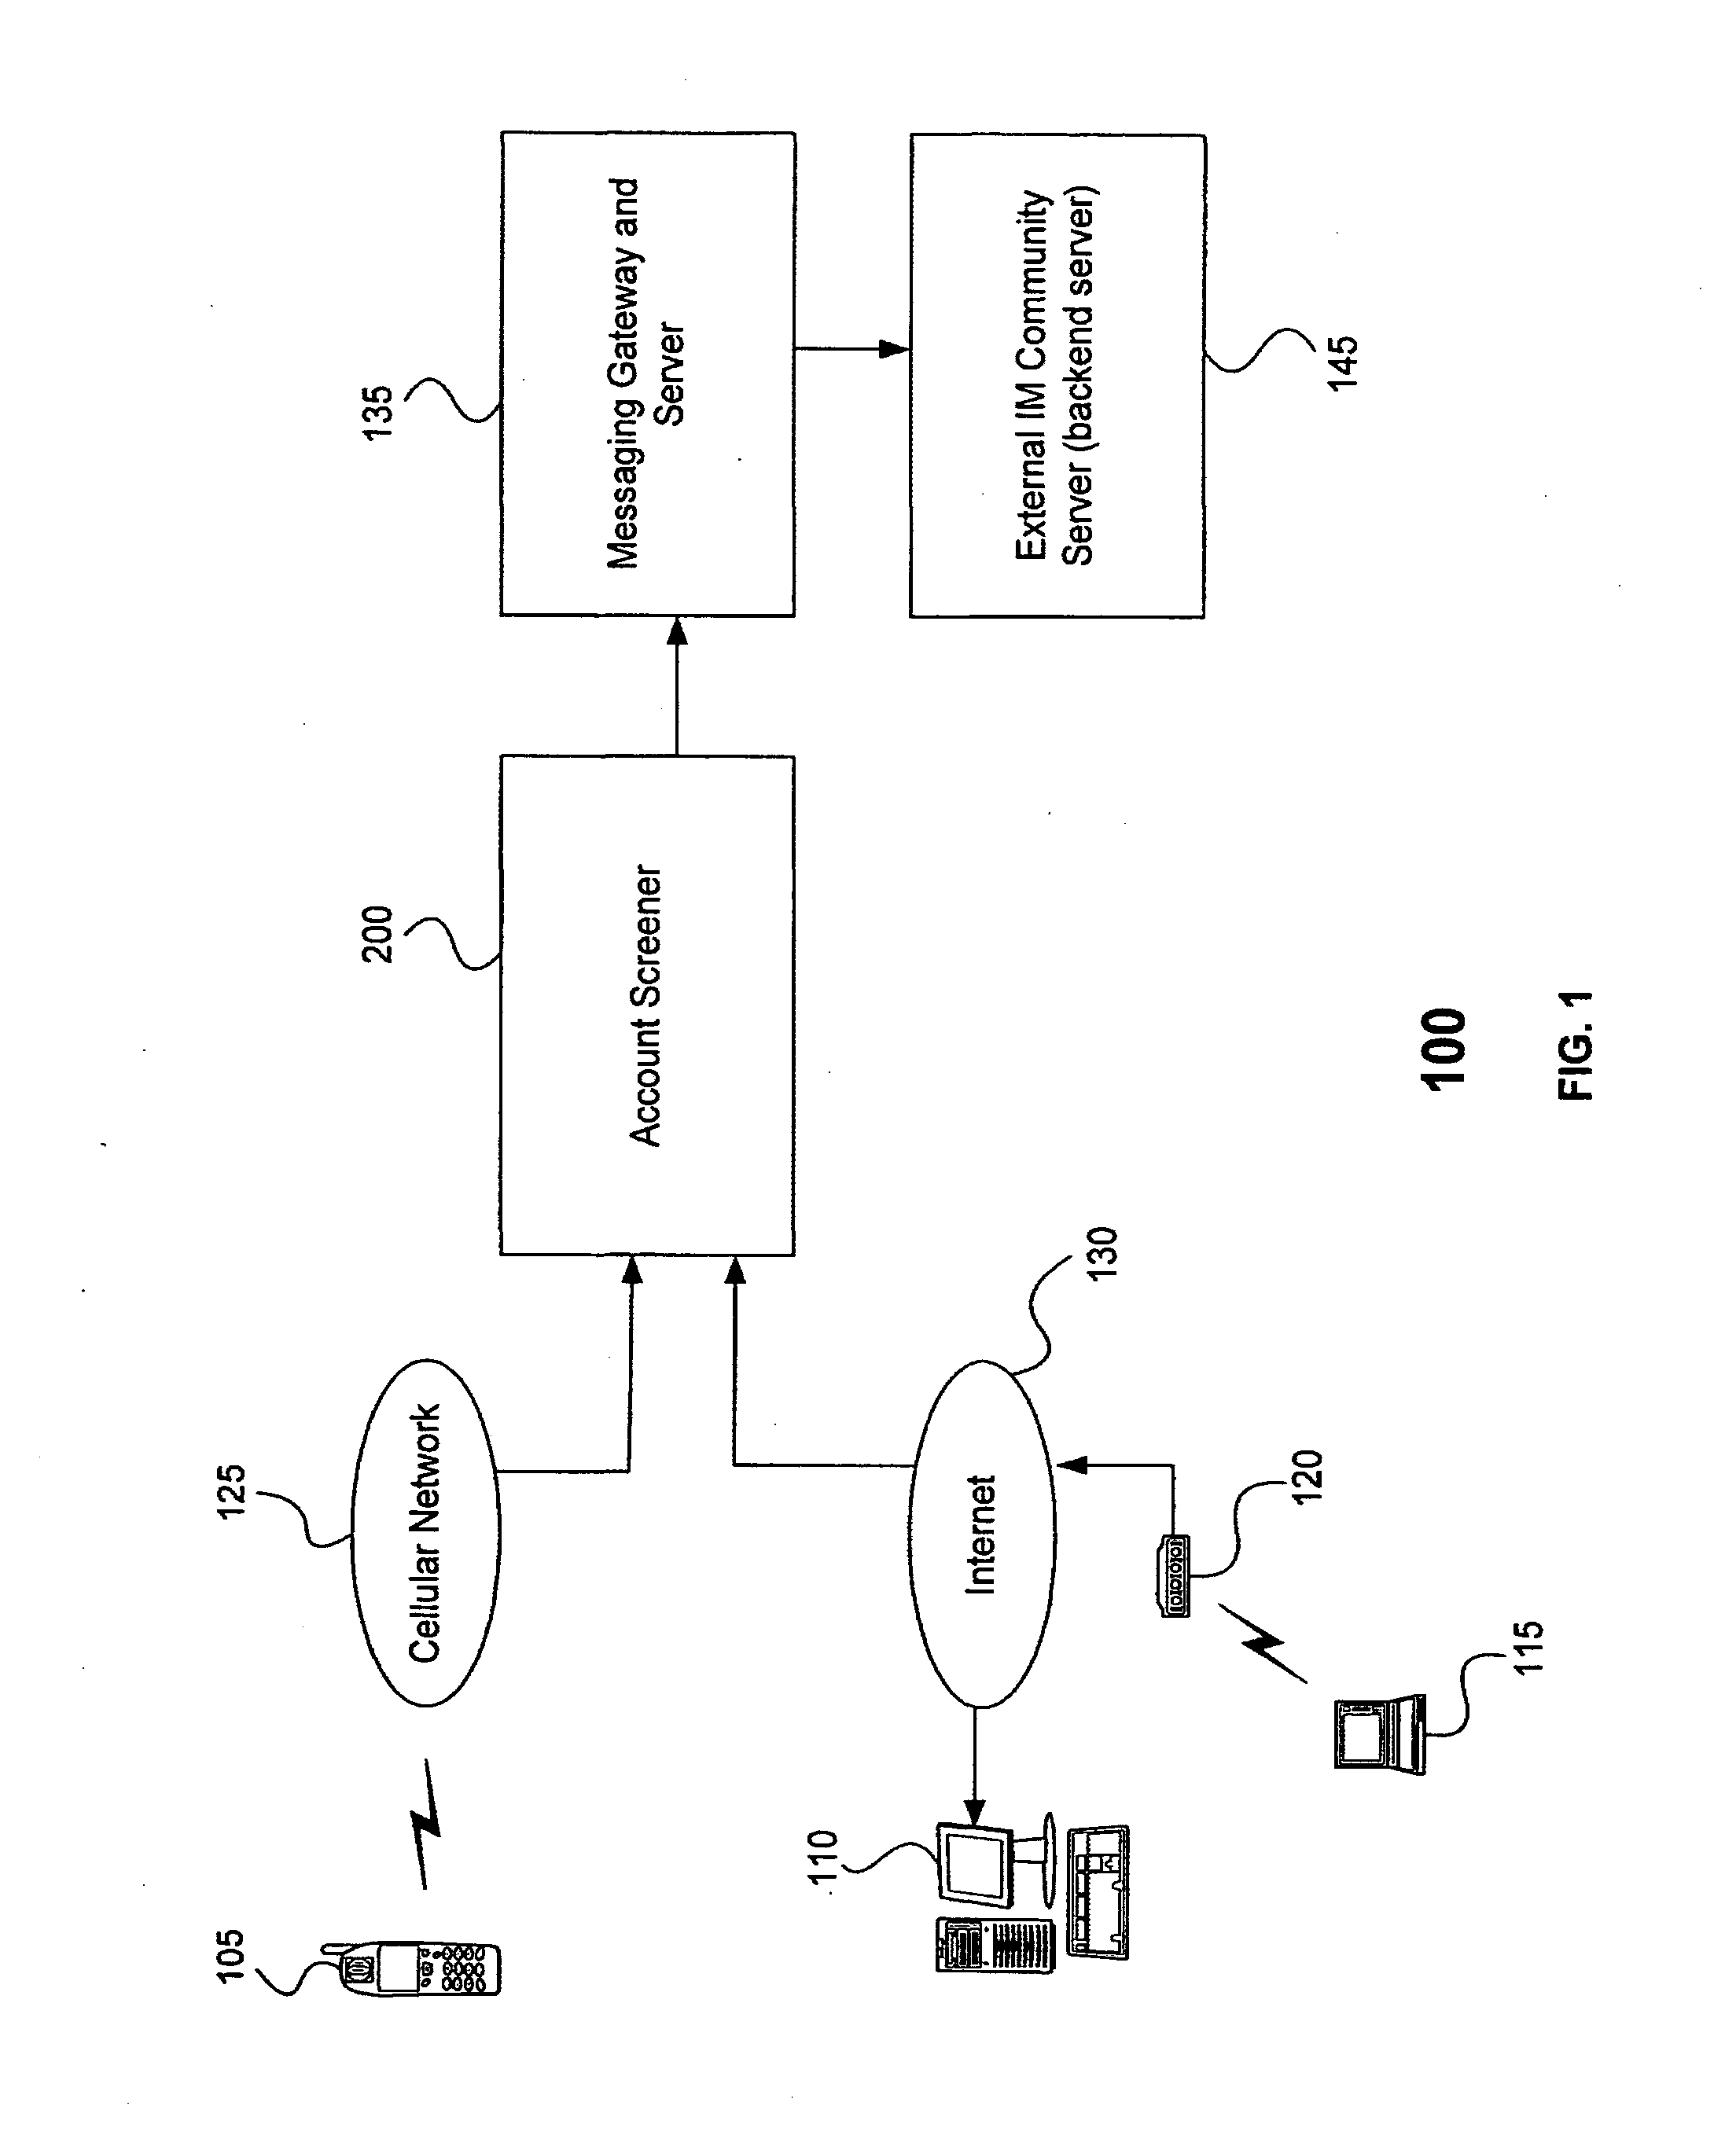 System and Method for Providing Prepaid Billing For Instant Messaging Users